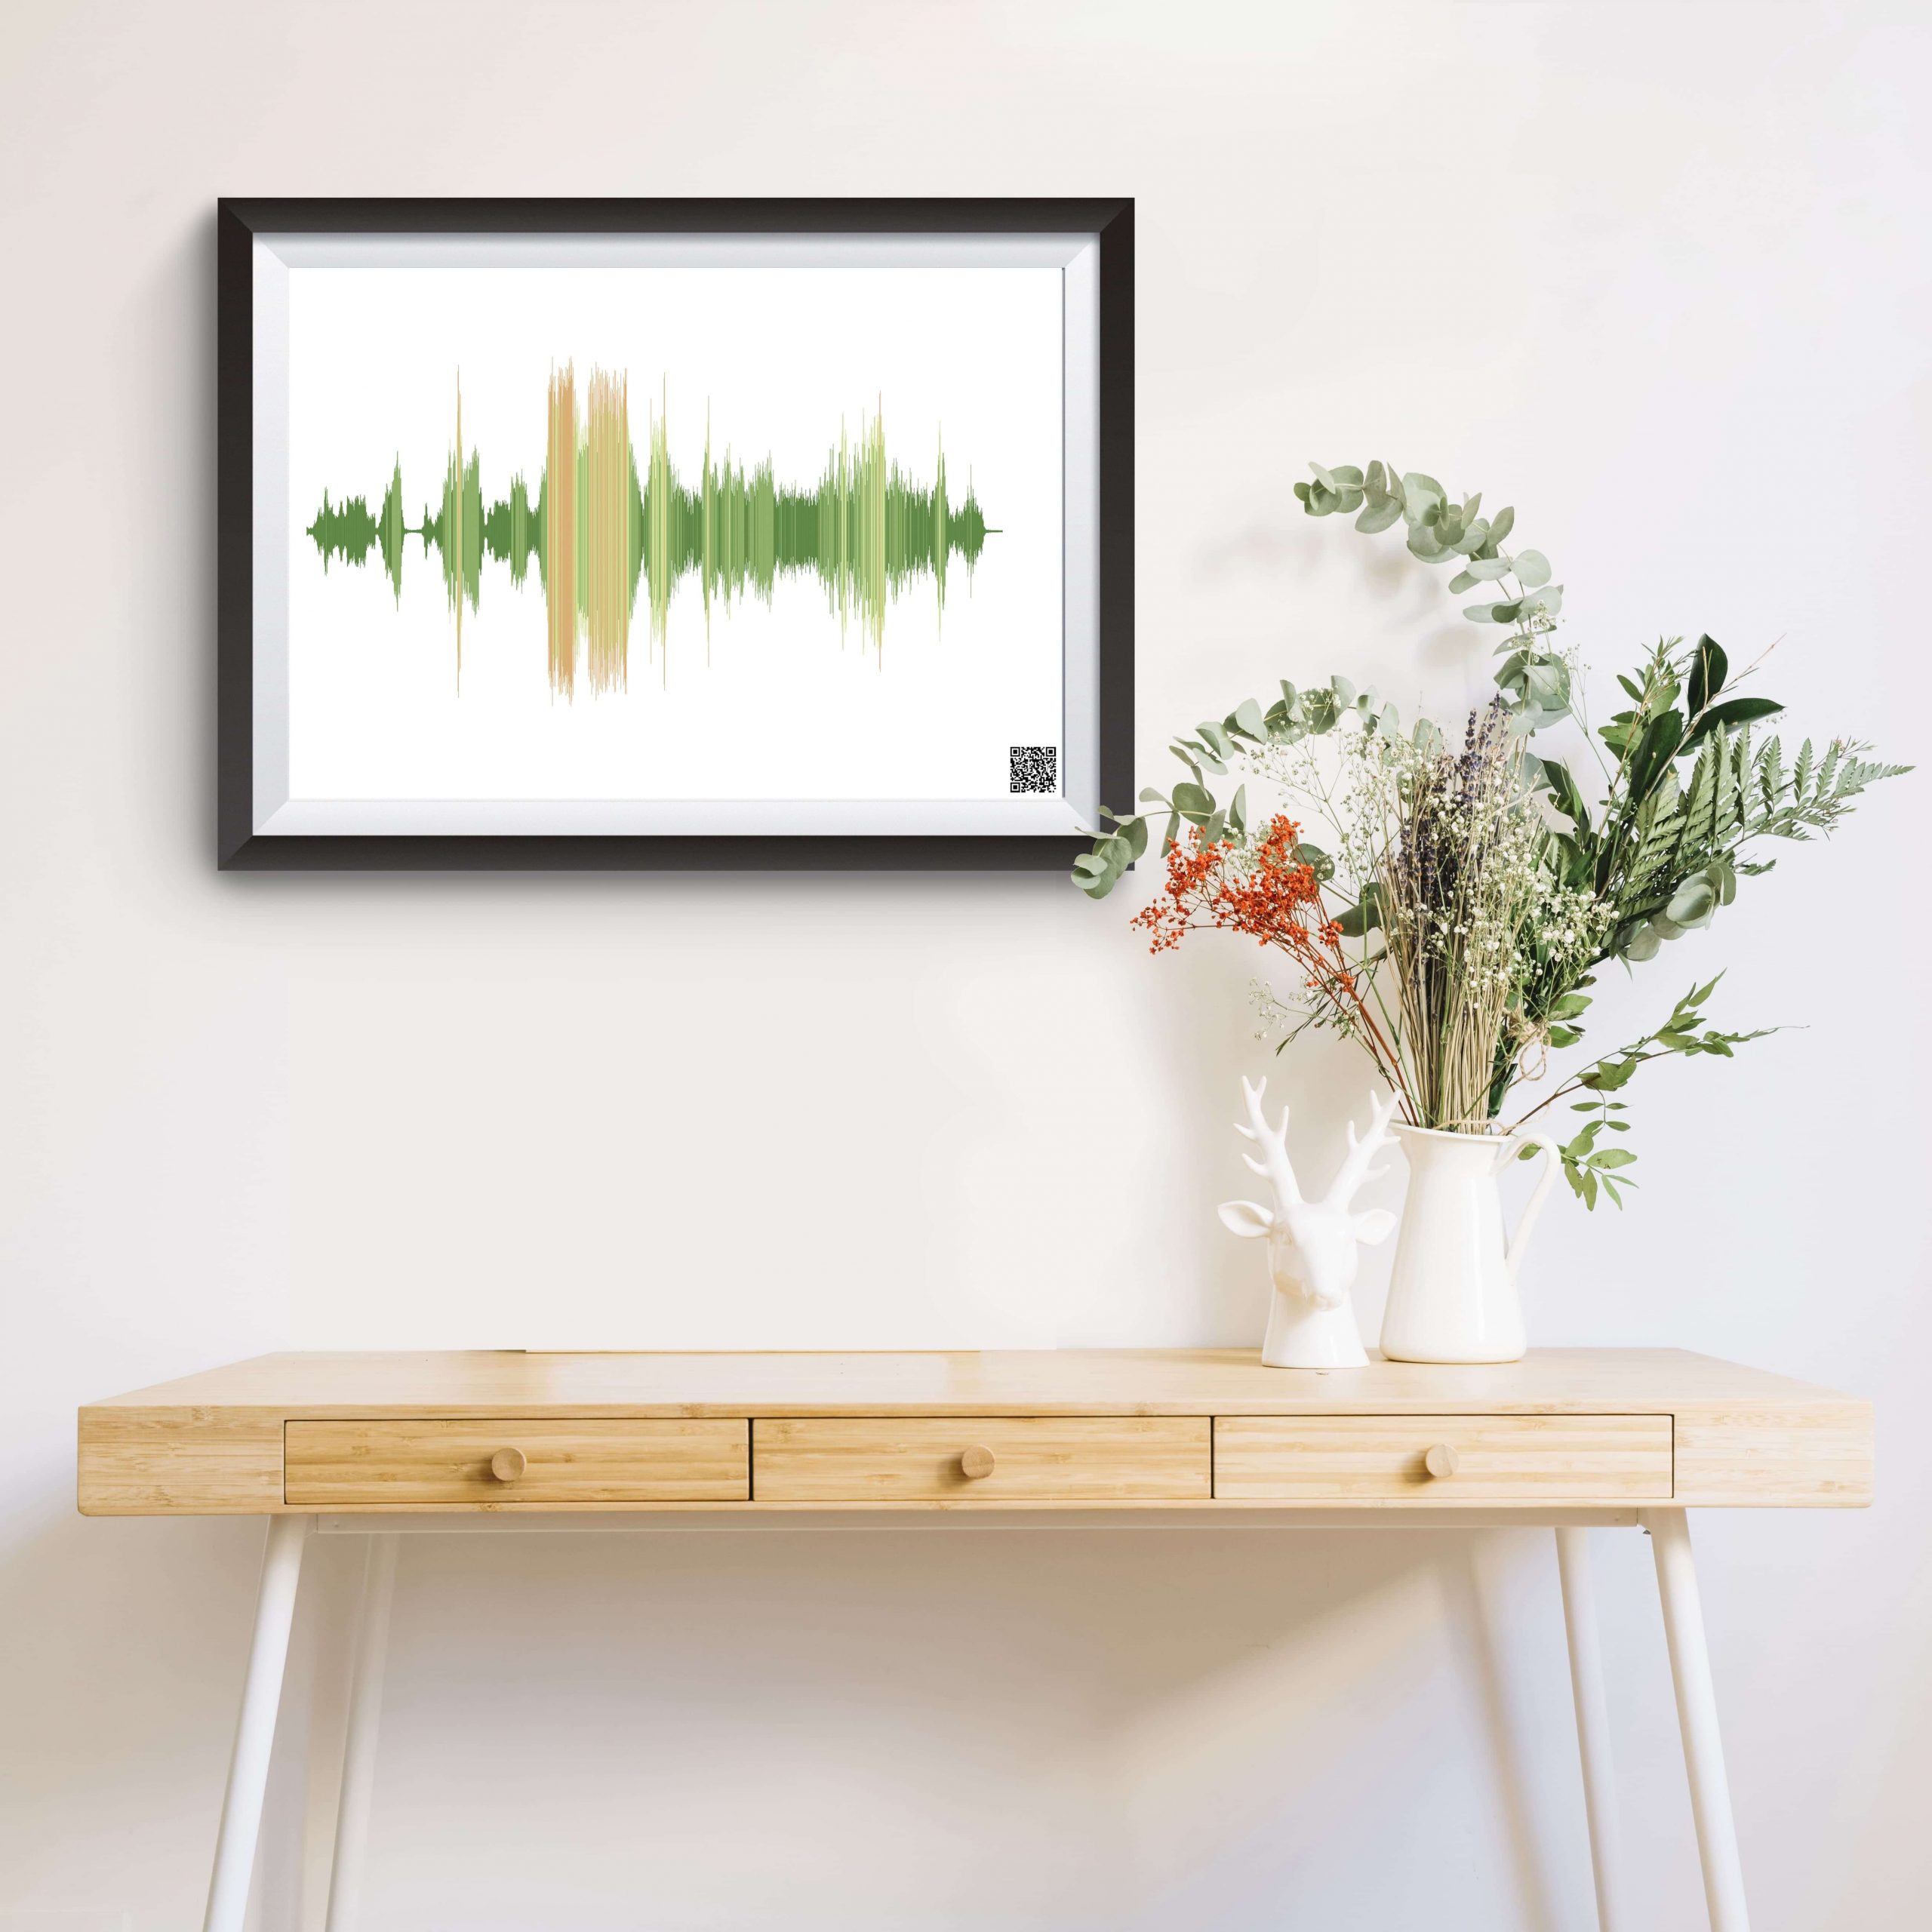 Sound Wave Picture